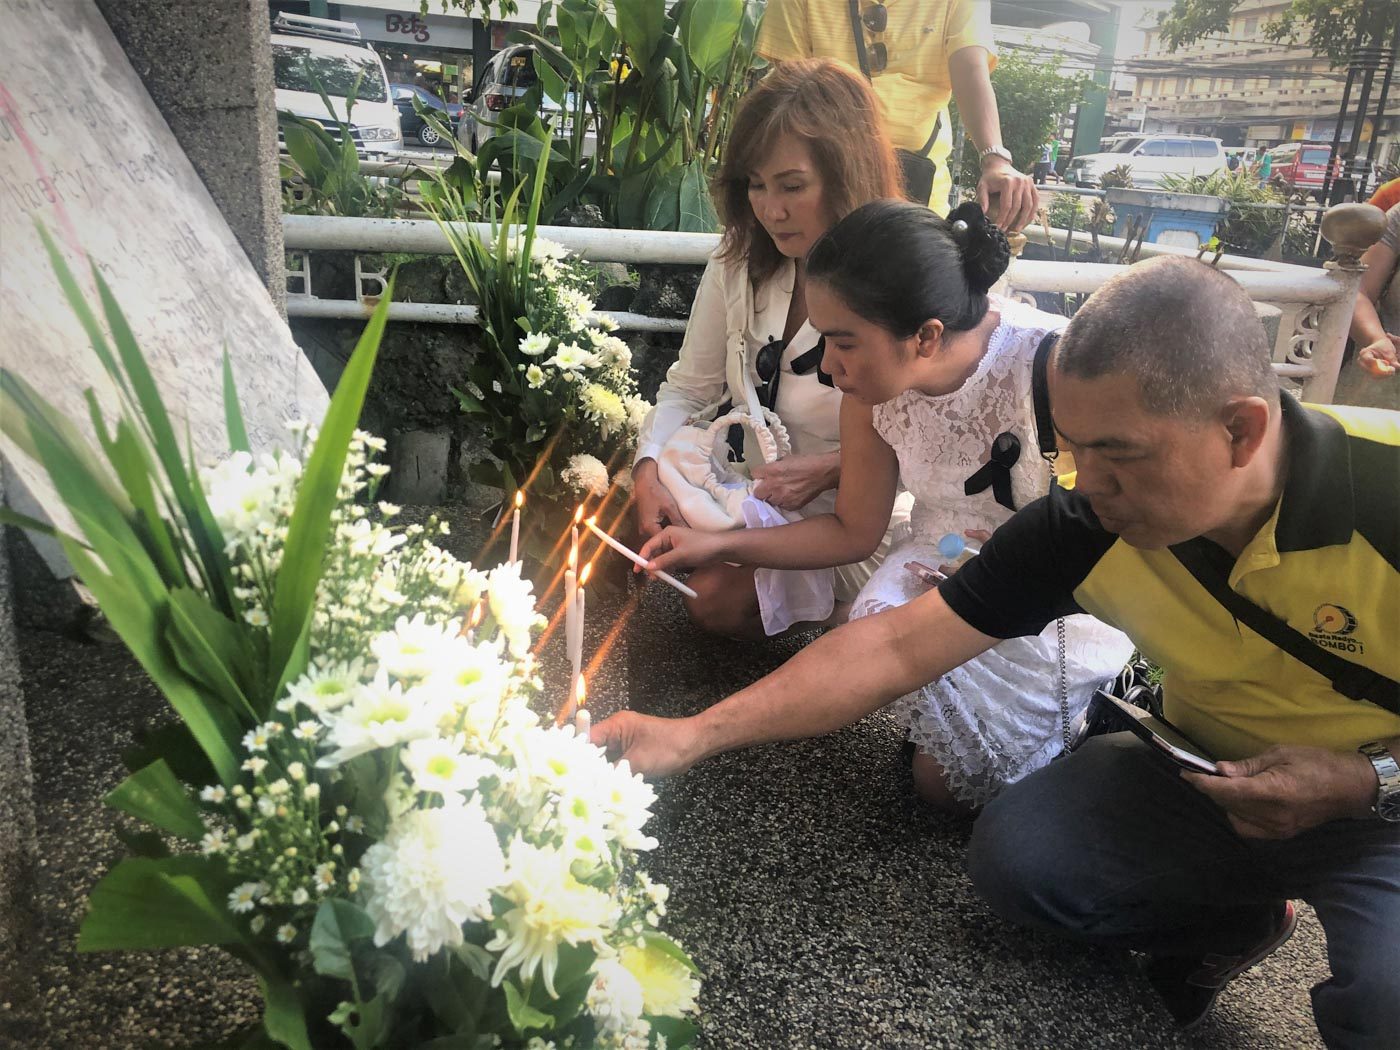 COMMEMORATION. Andrea Jayme, her daughter Hina Sofia Danielle Bianca Tugot, and Dennis Rubica of Bombo Radyo Bacolod light candles at the Marker of the Fallen Journalists at the Bacolod City public plaza on November 22, 2019. Photo courtesy of NUJP-Bacolod 